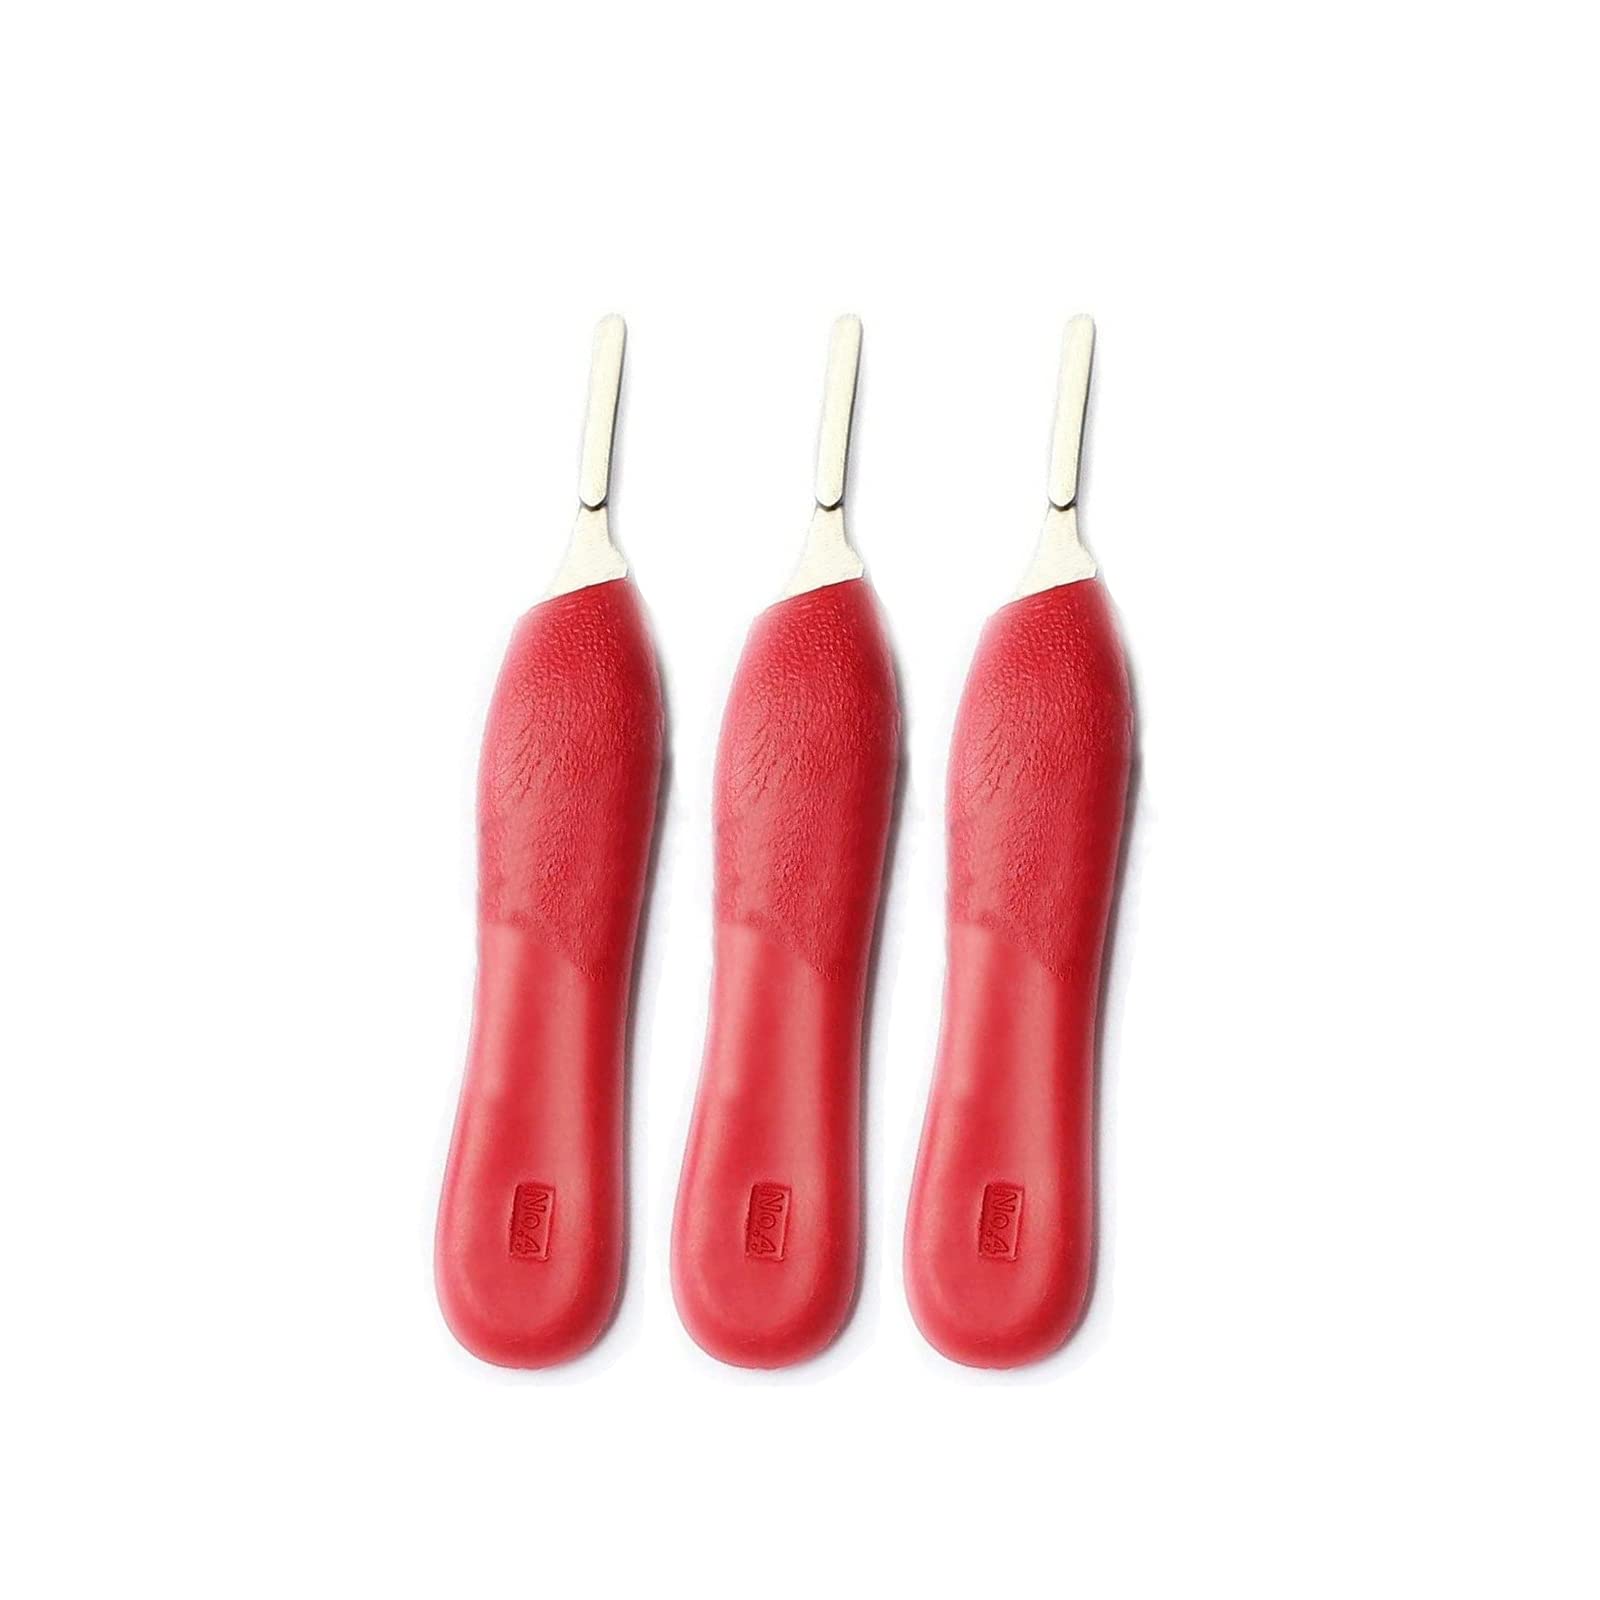 AAProTools Lot Of 3 Scalpel Handle #4, Red Plastic Grip - Fitting Surgical Blades #20 Thru 24